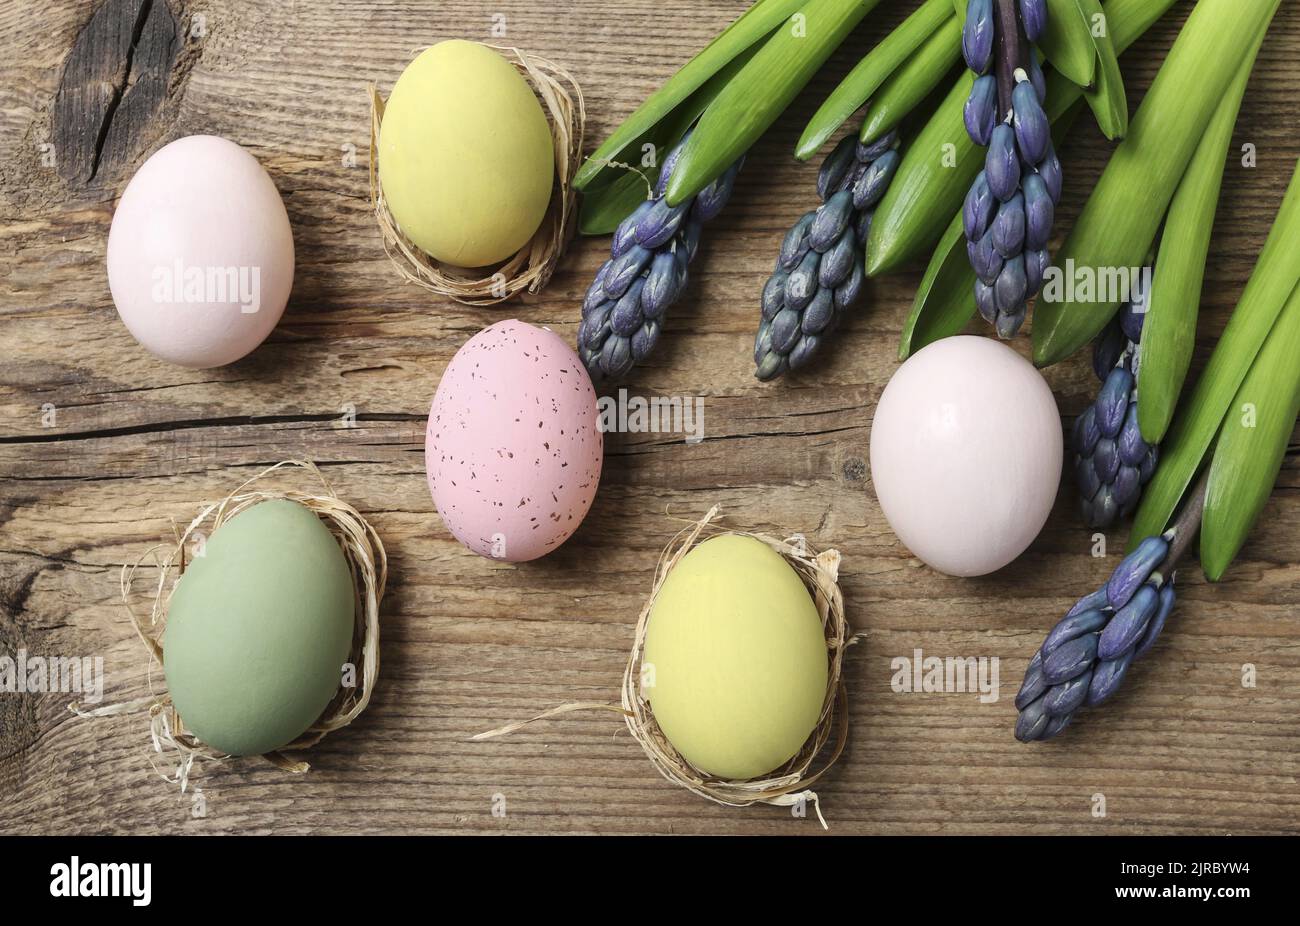 Violet hyacinth flowers and Easter eggs on wooden background. Graphic resources Stock Photo